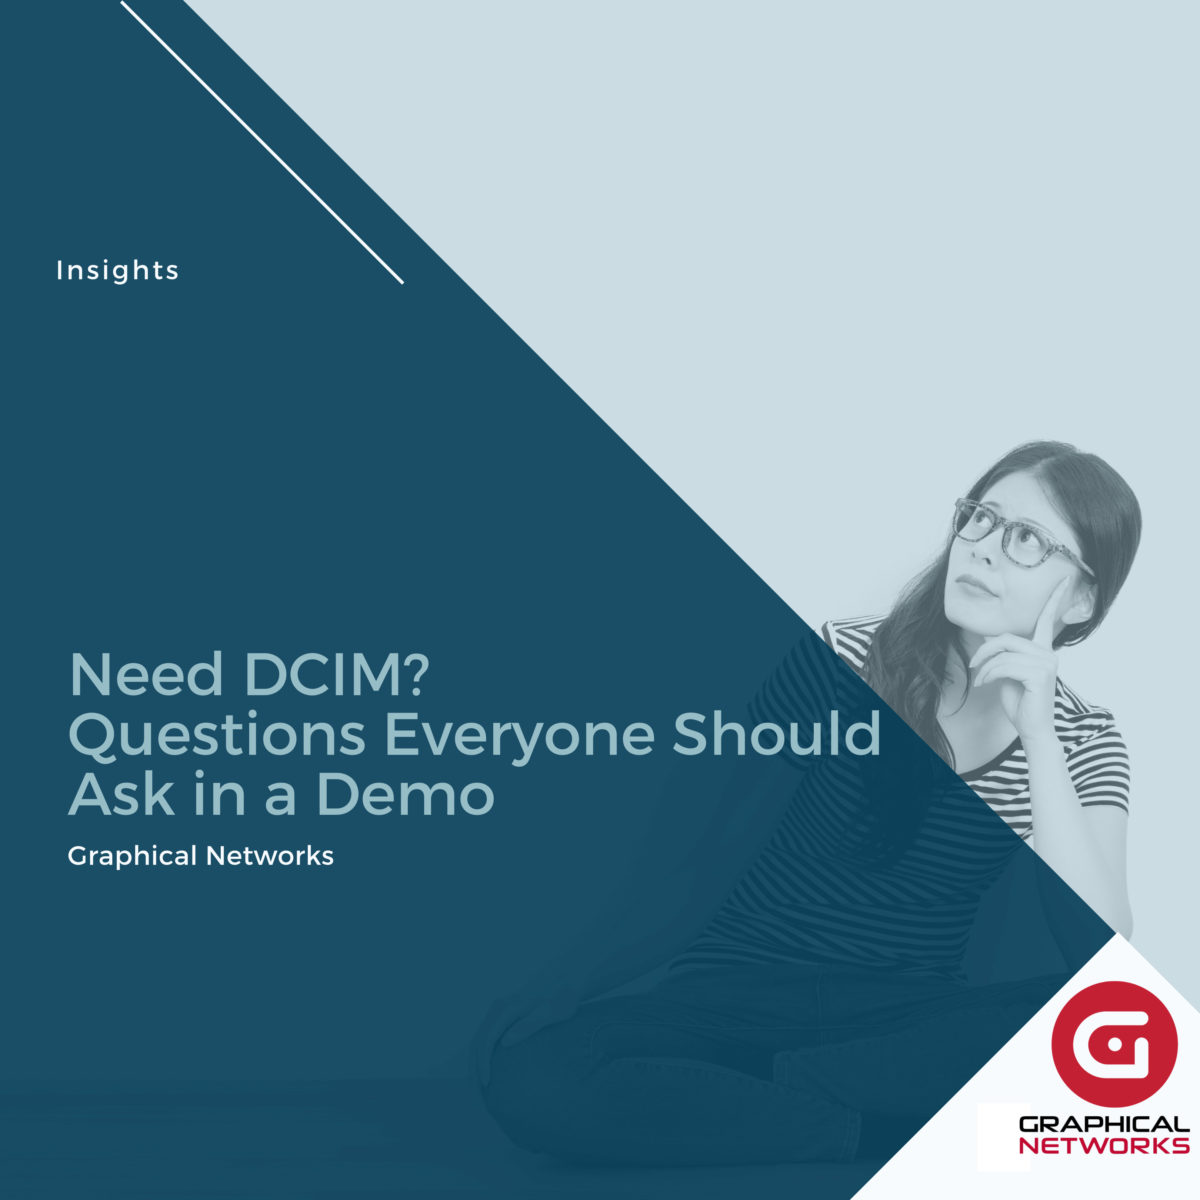 Need DCIM?  Questions Everyone Should Ask in a Demo